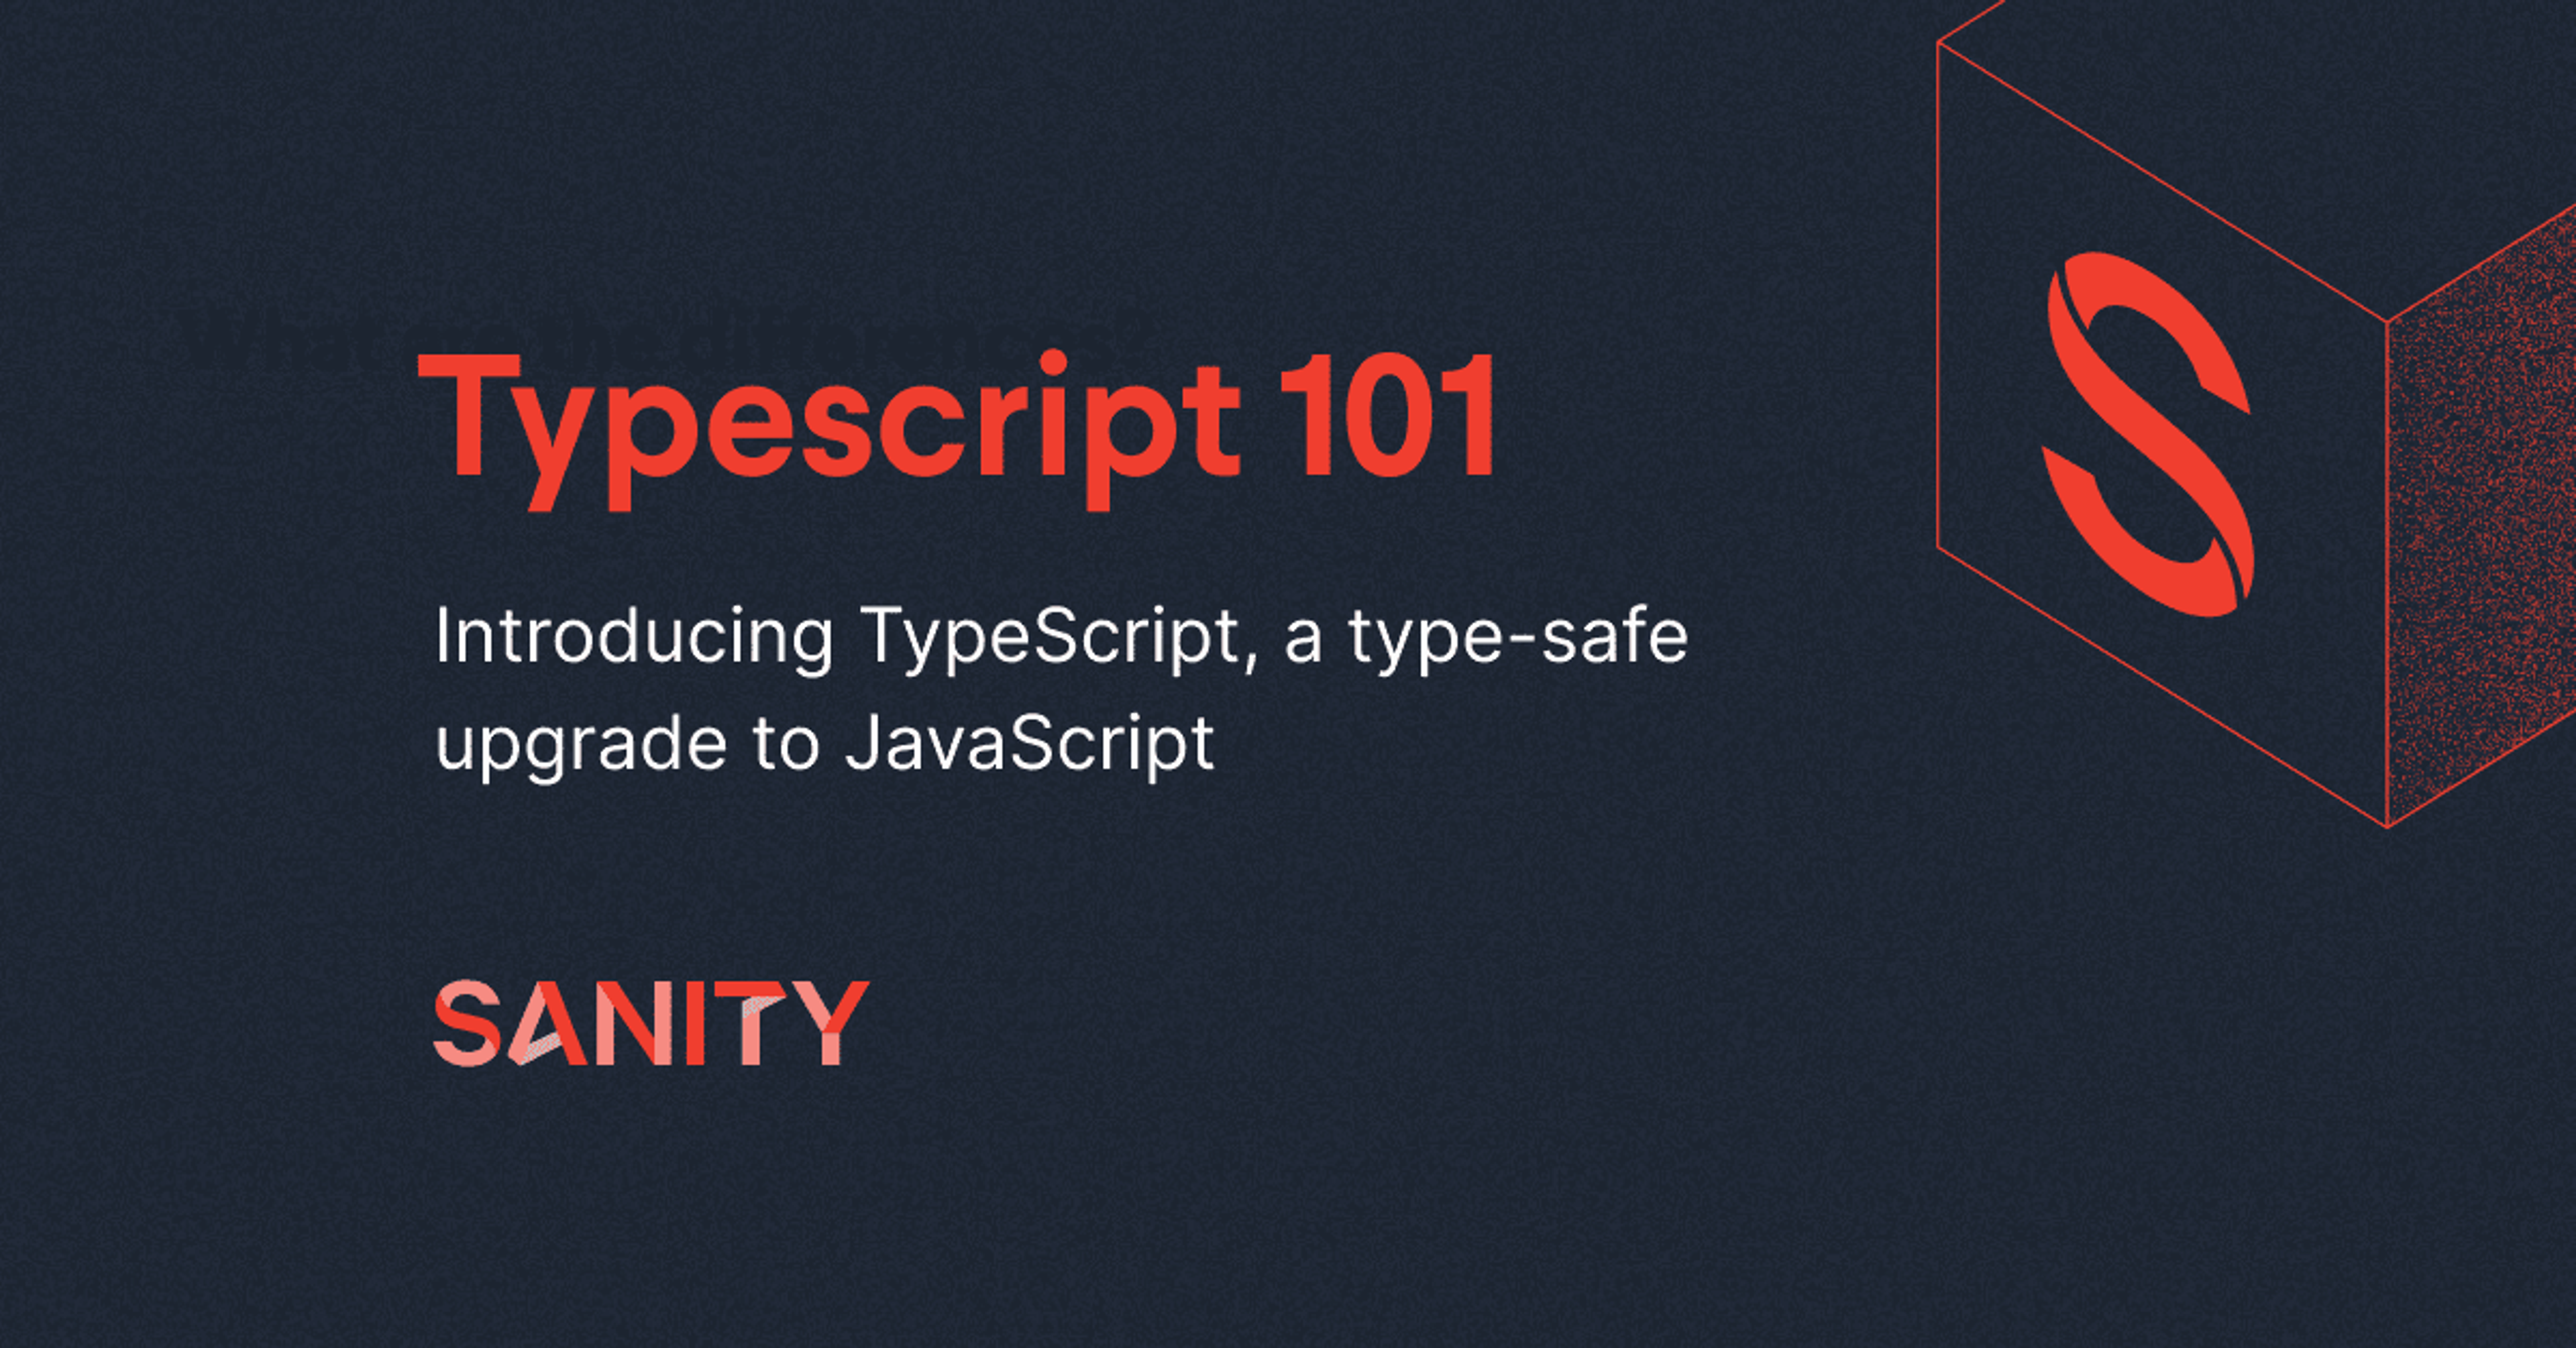 TypeScript 101: What is it and why should you use it? 